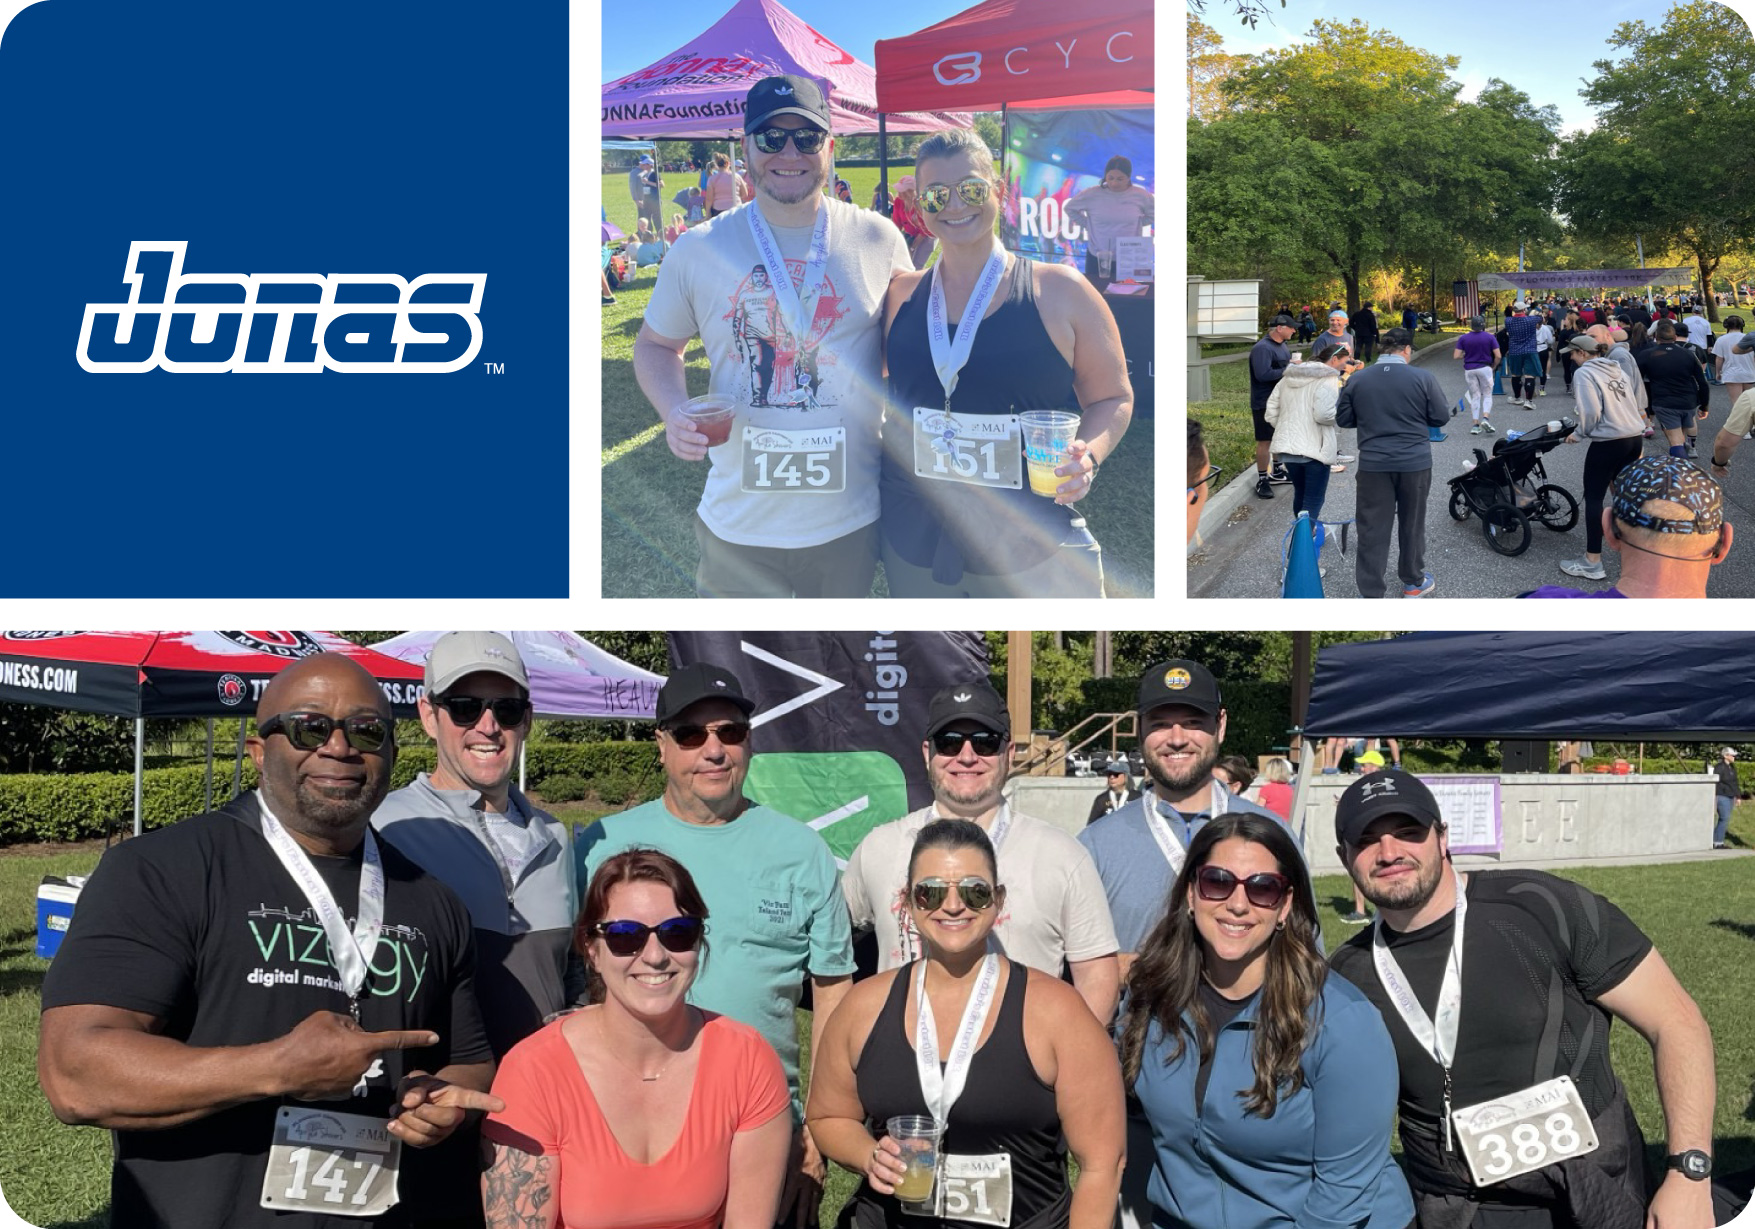 Photo collage of Jonas' Vizergy employees participating in the Apryle Showers run fundraiser.